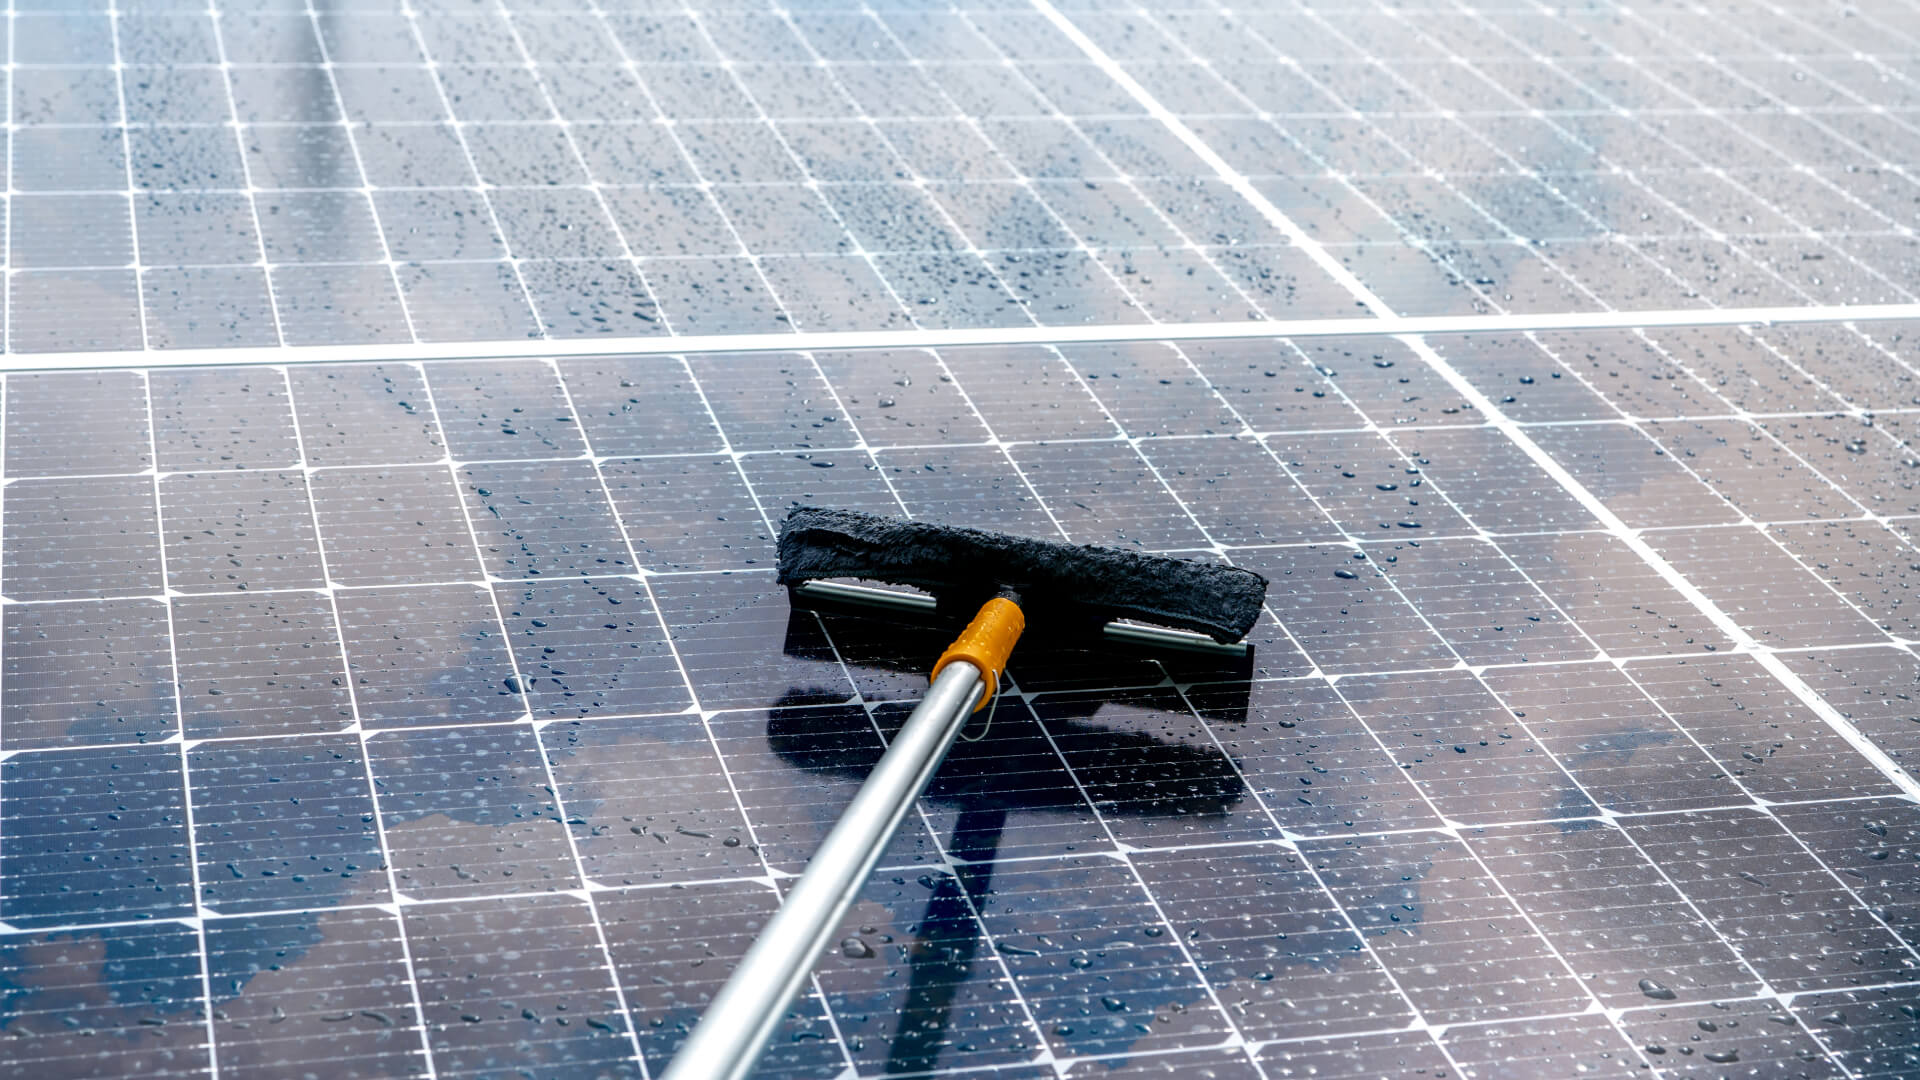 Cleaning a solar panel with a broom on the Sunshine Coast Keywords: solar panel cleaning